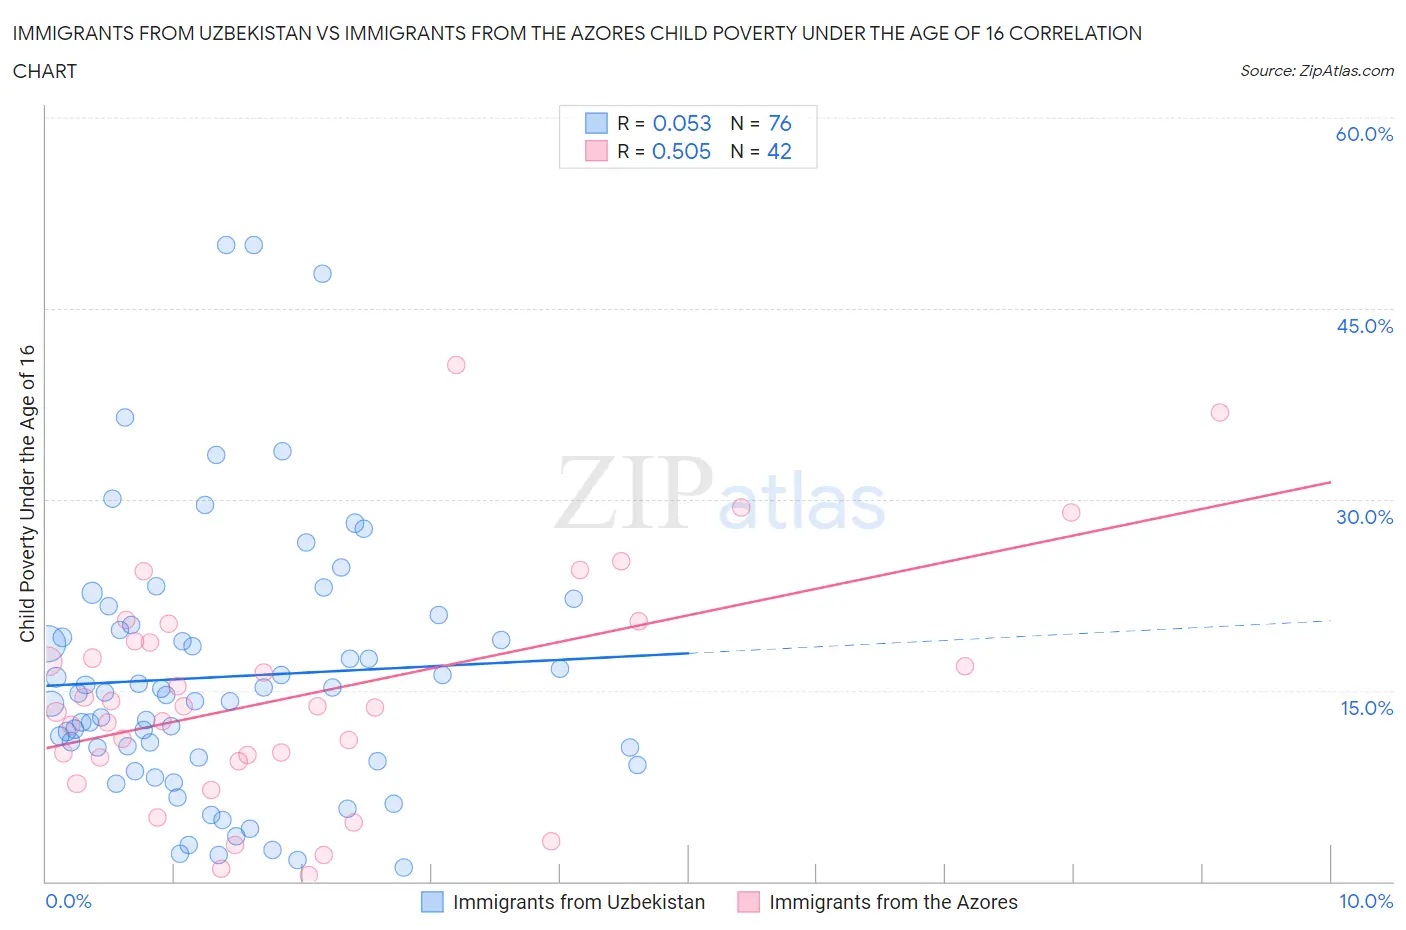 Immigrants from Uzbekistan vs Immigrants from the Azores Child Poverty Under the Age of 16